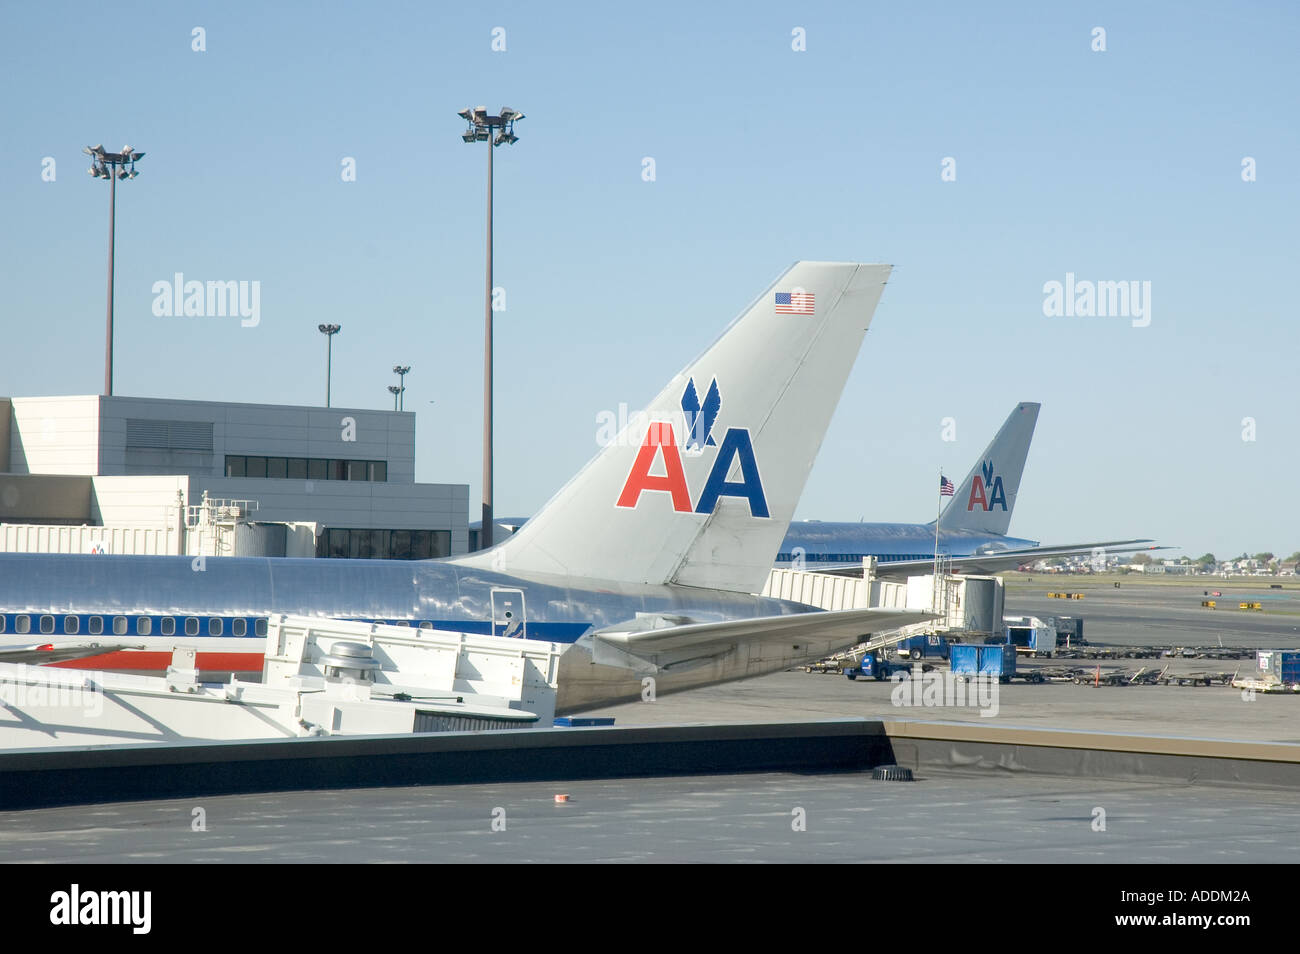 american airlines Stock Photo